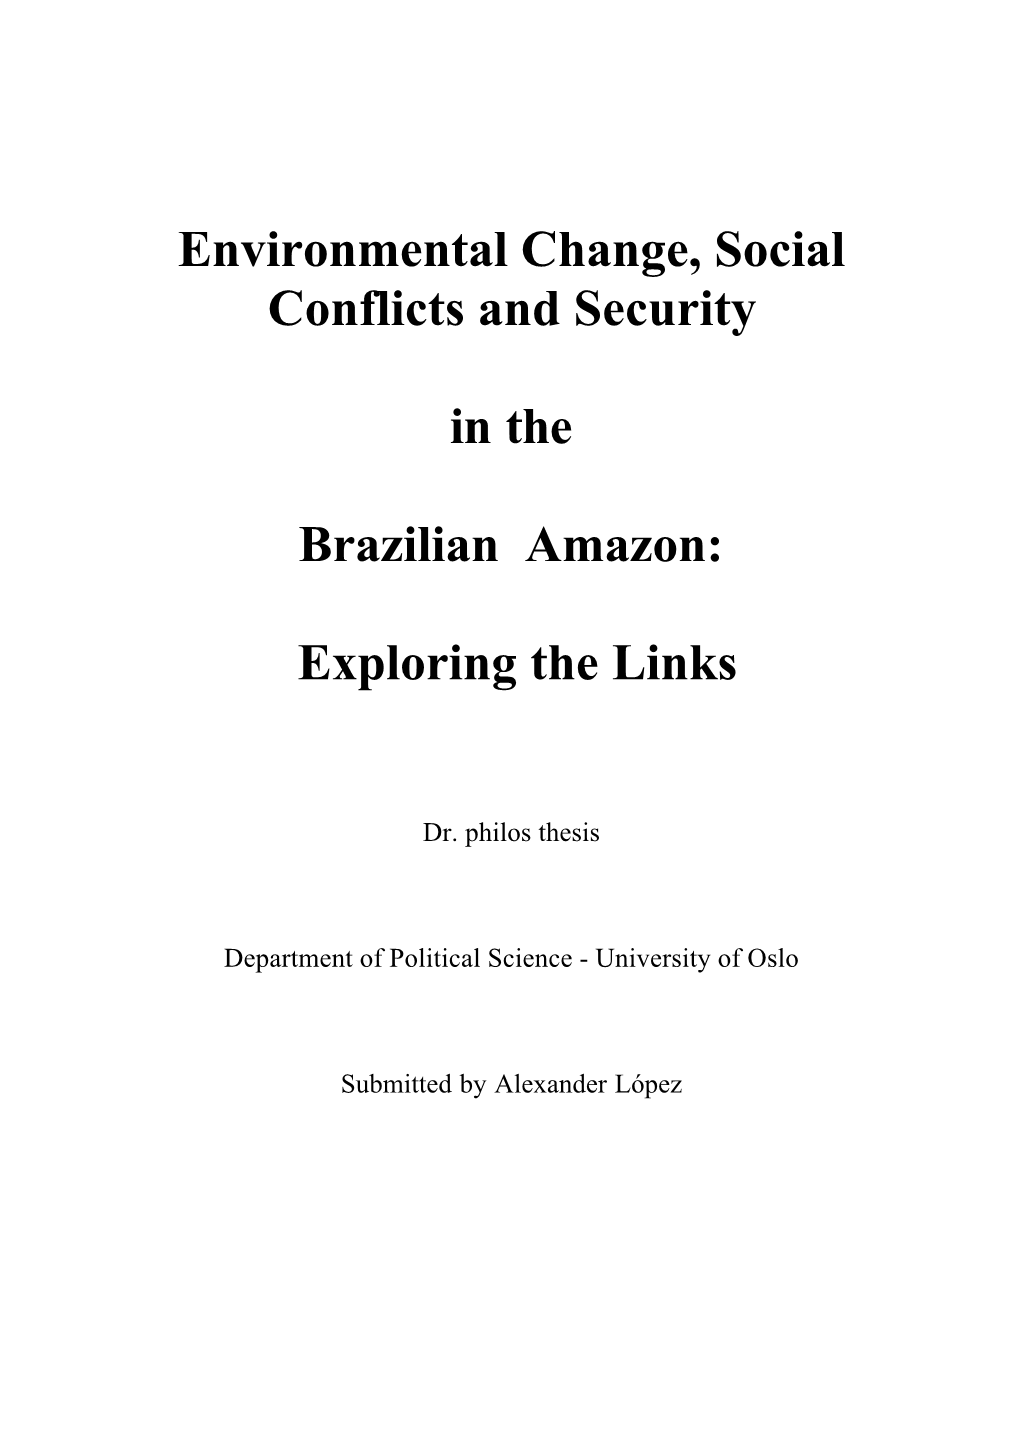 Environmental Change, Social Conflicts and Security in the Brazilian Amazon: Exploring the Links